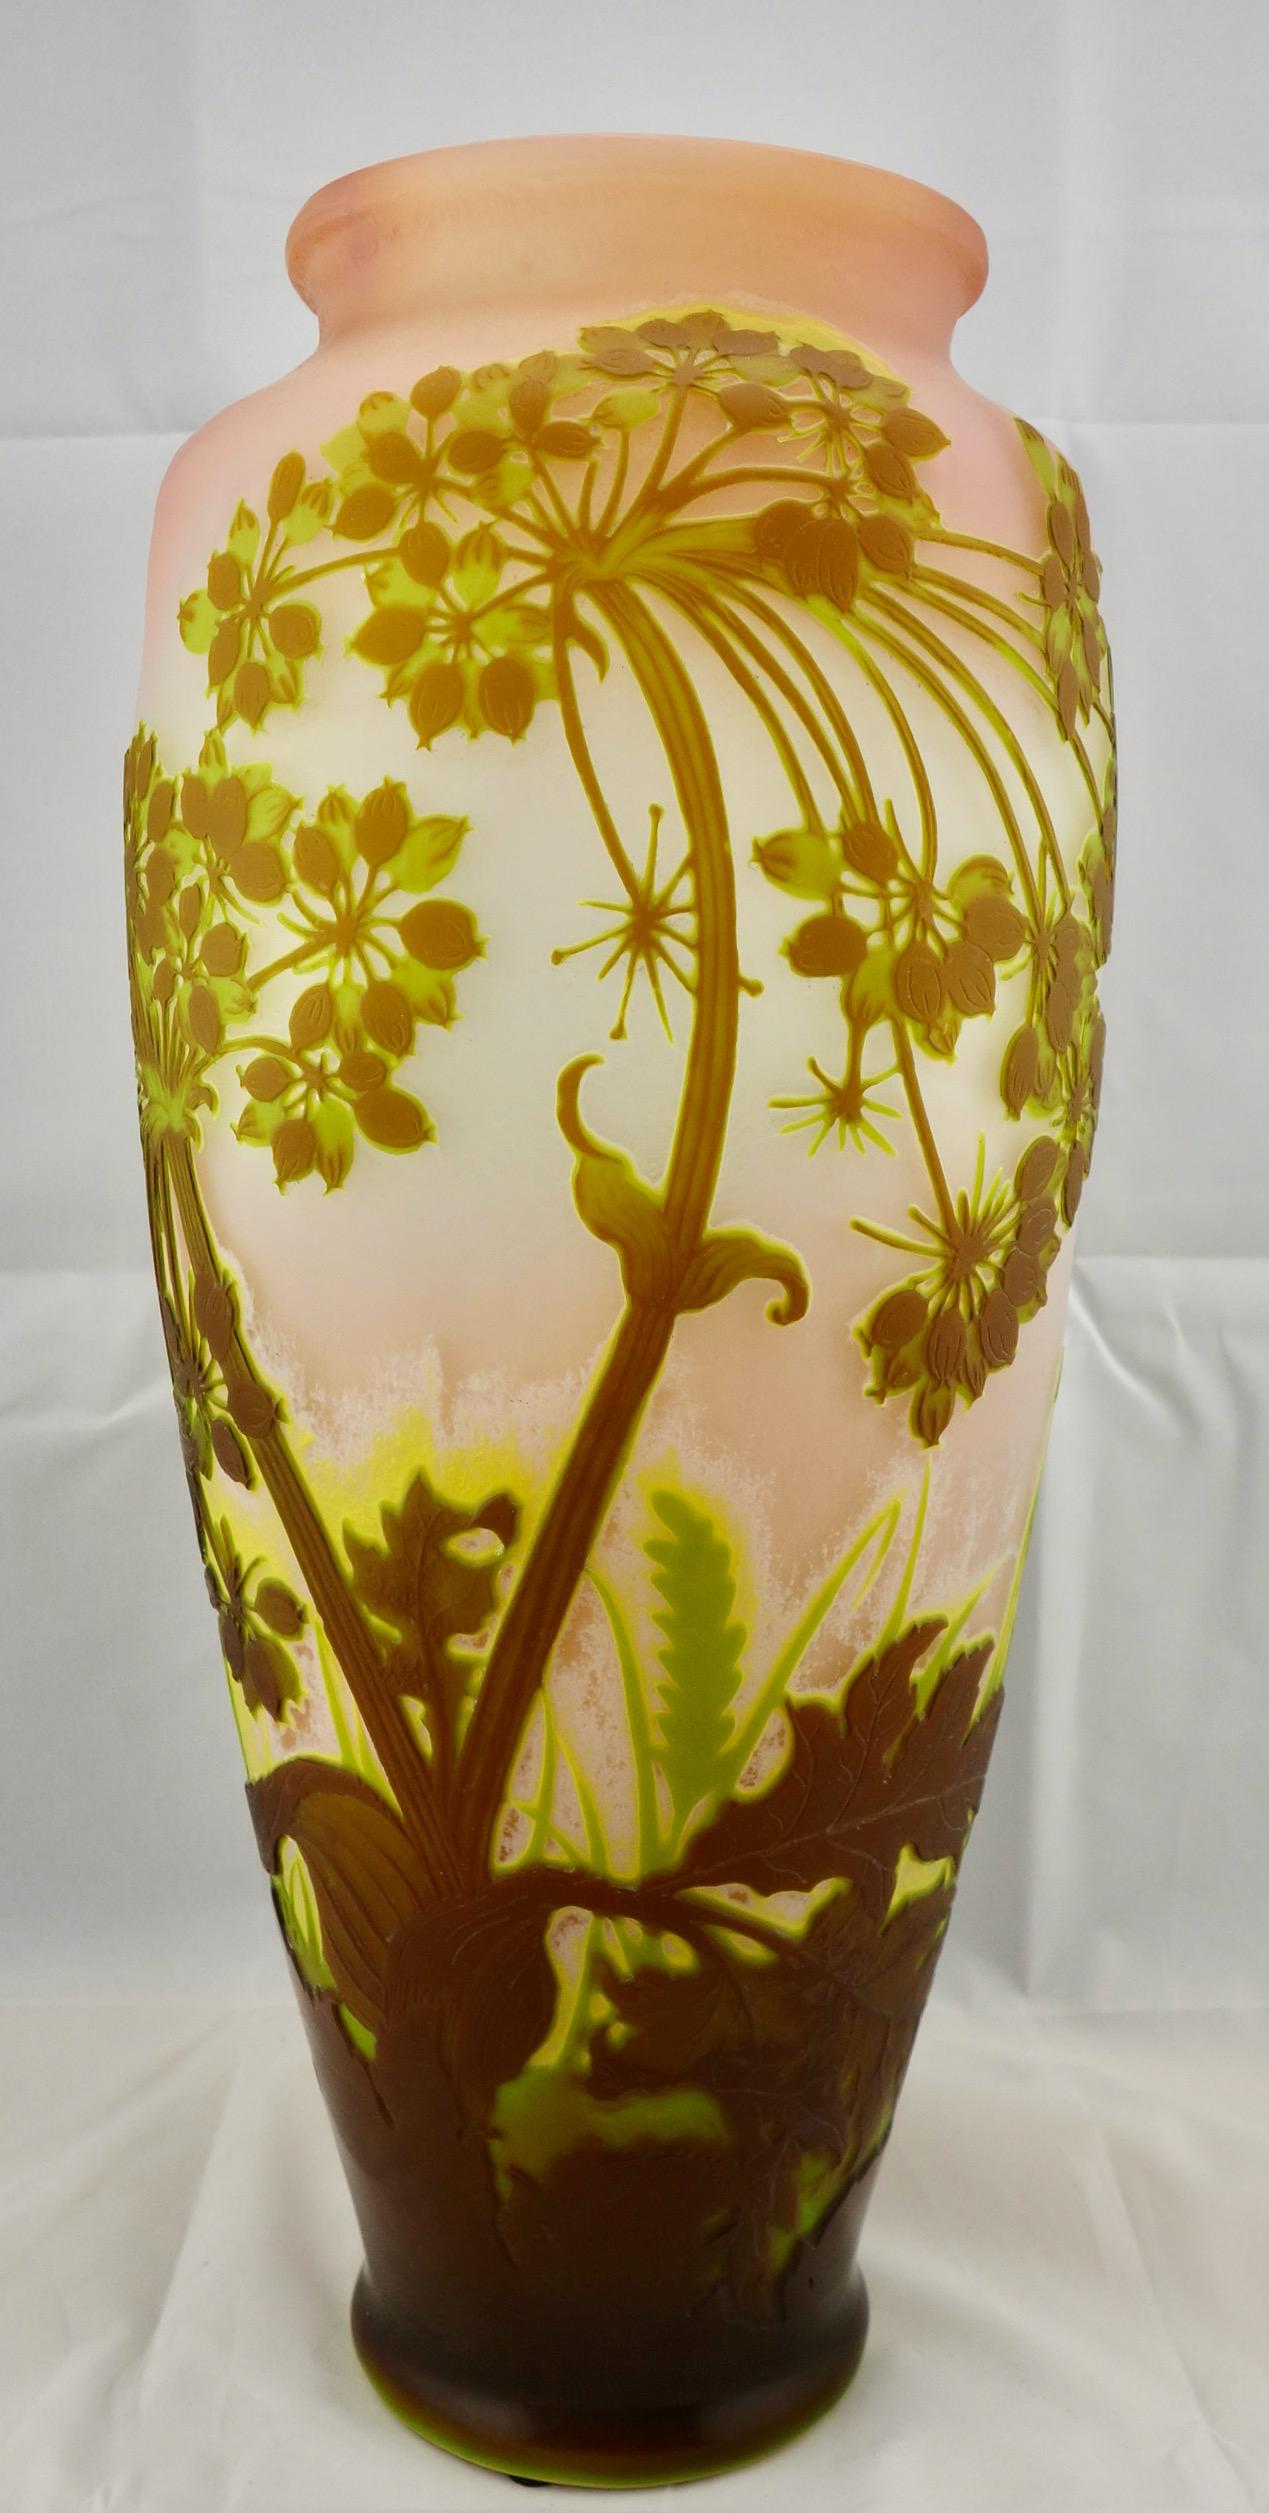 Galle cameo glass allium vase, circa early 1900s. The cameo glass is present in a least three colors over the light background. The vase signed in cameo, and was made in 1900s. It is 18 1/4